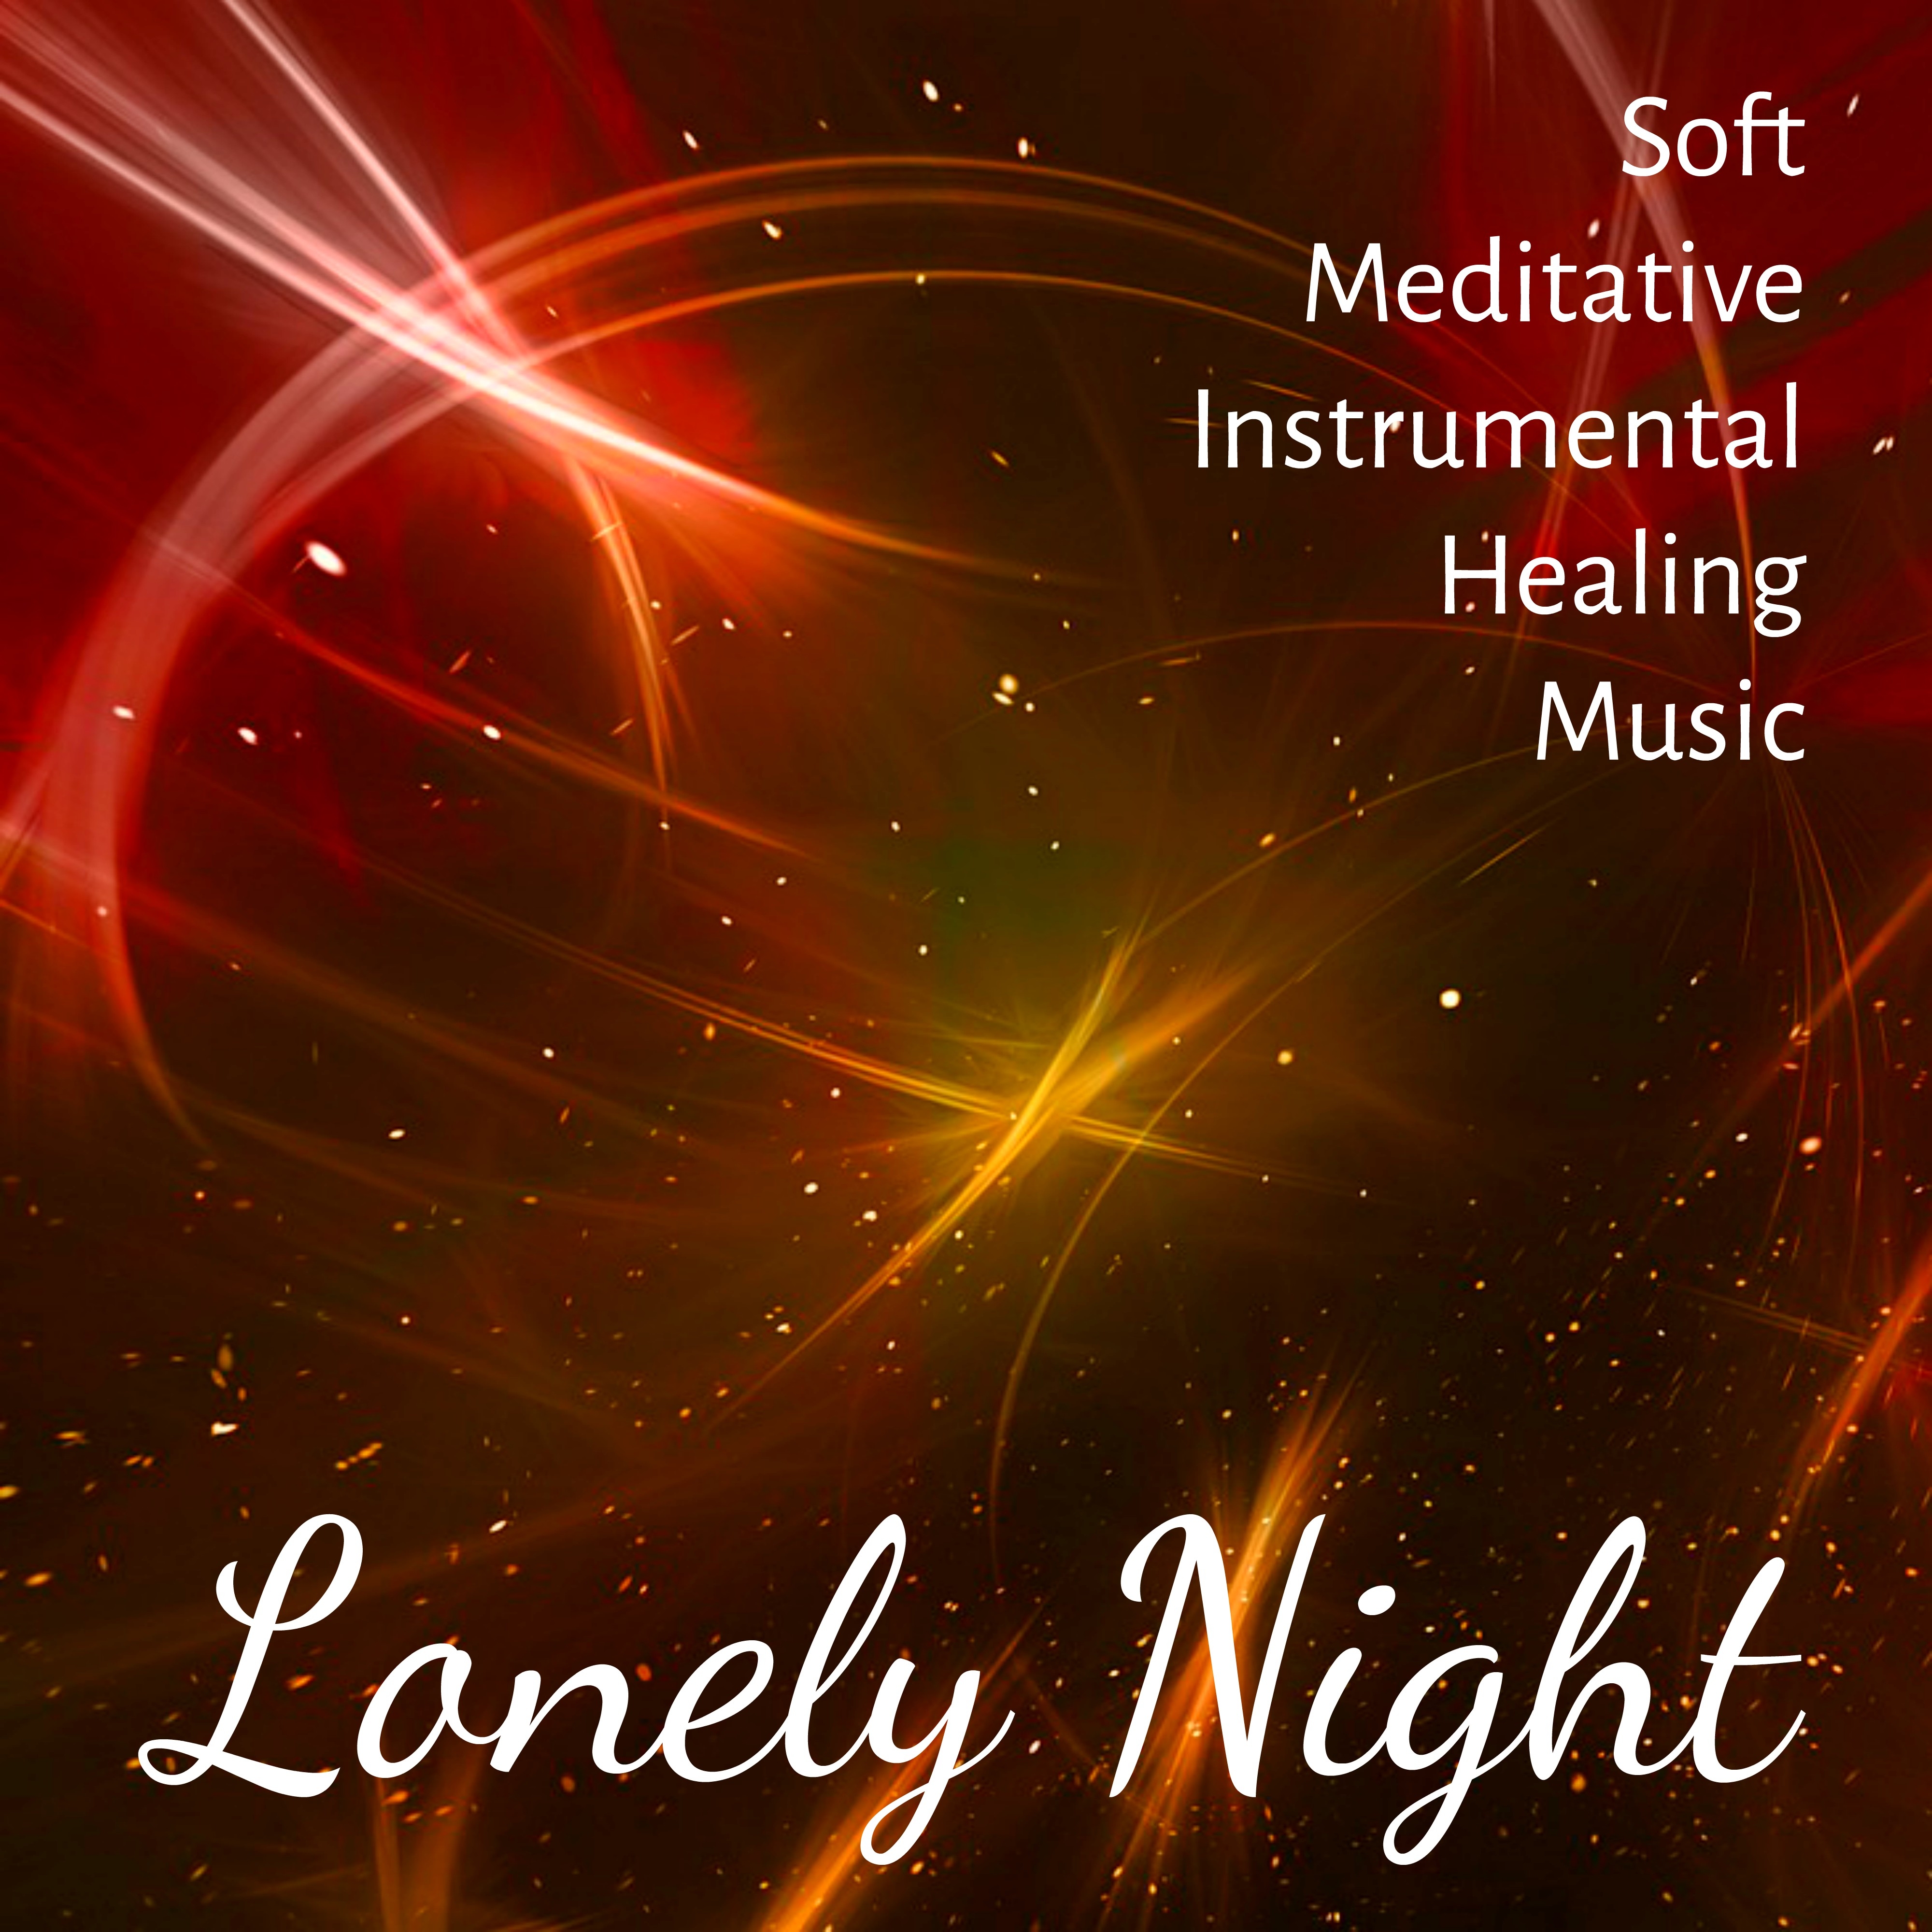 Lonely Night - Soft Meditative Instrumental Healing Music for Christmas Party New Start with Relaxing Binaural Nature Sounds